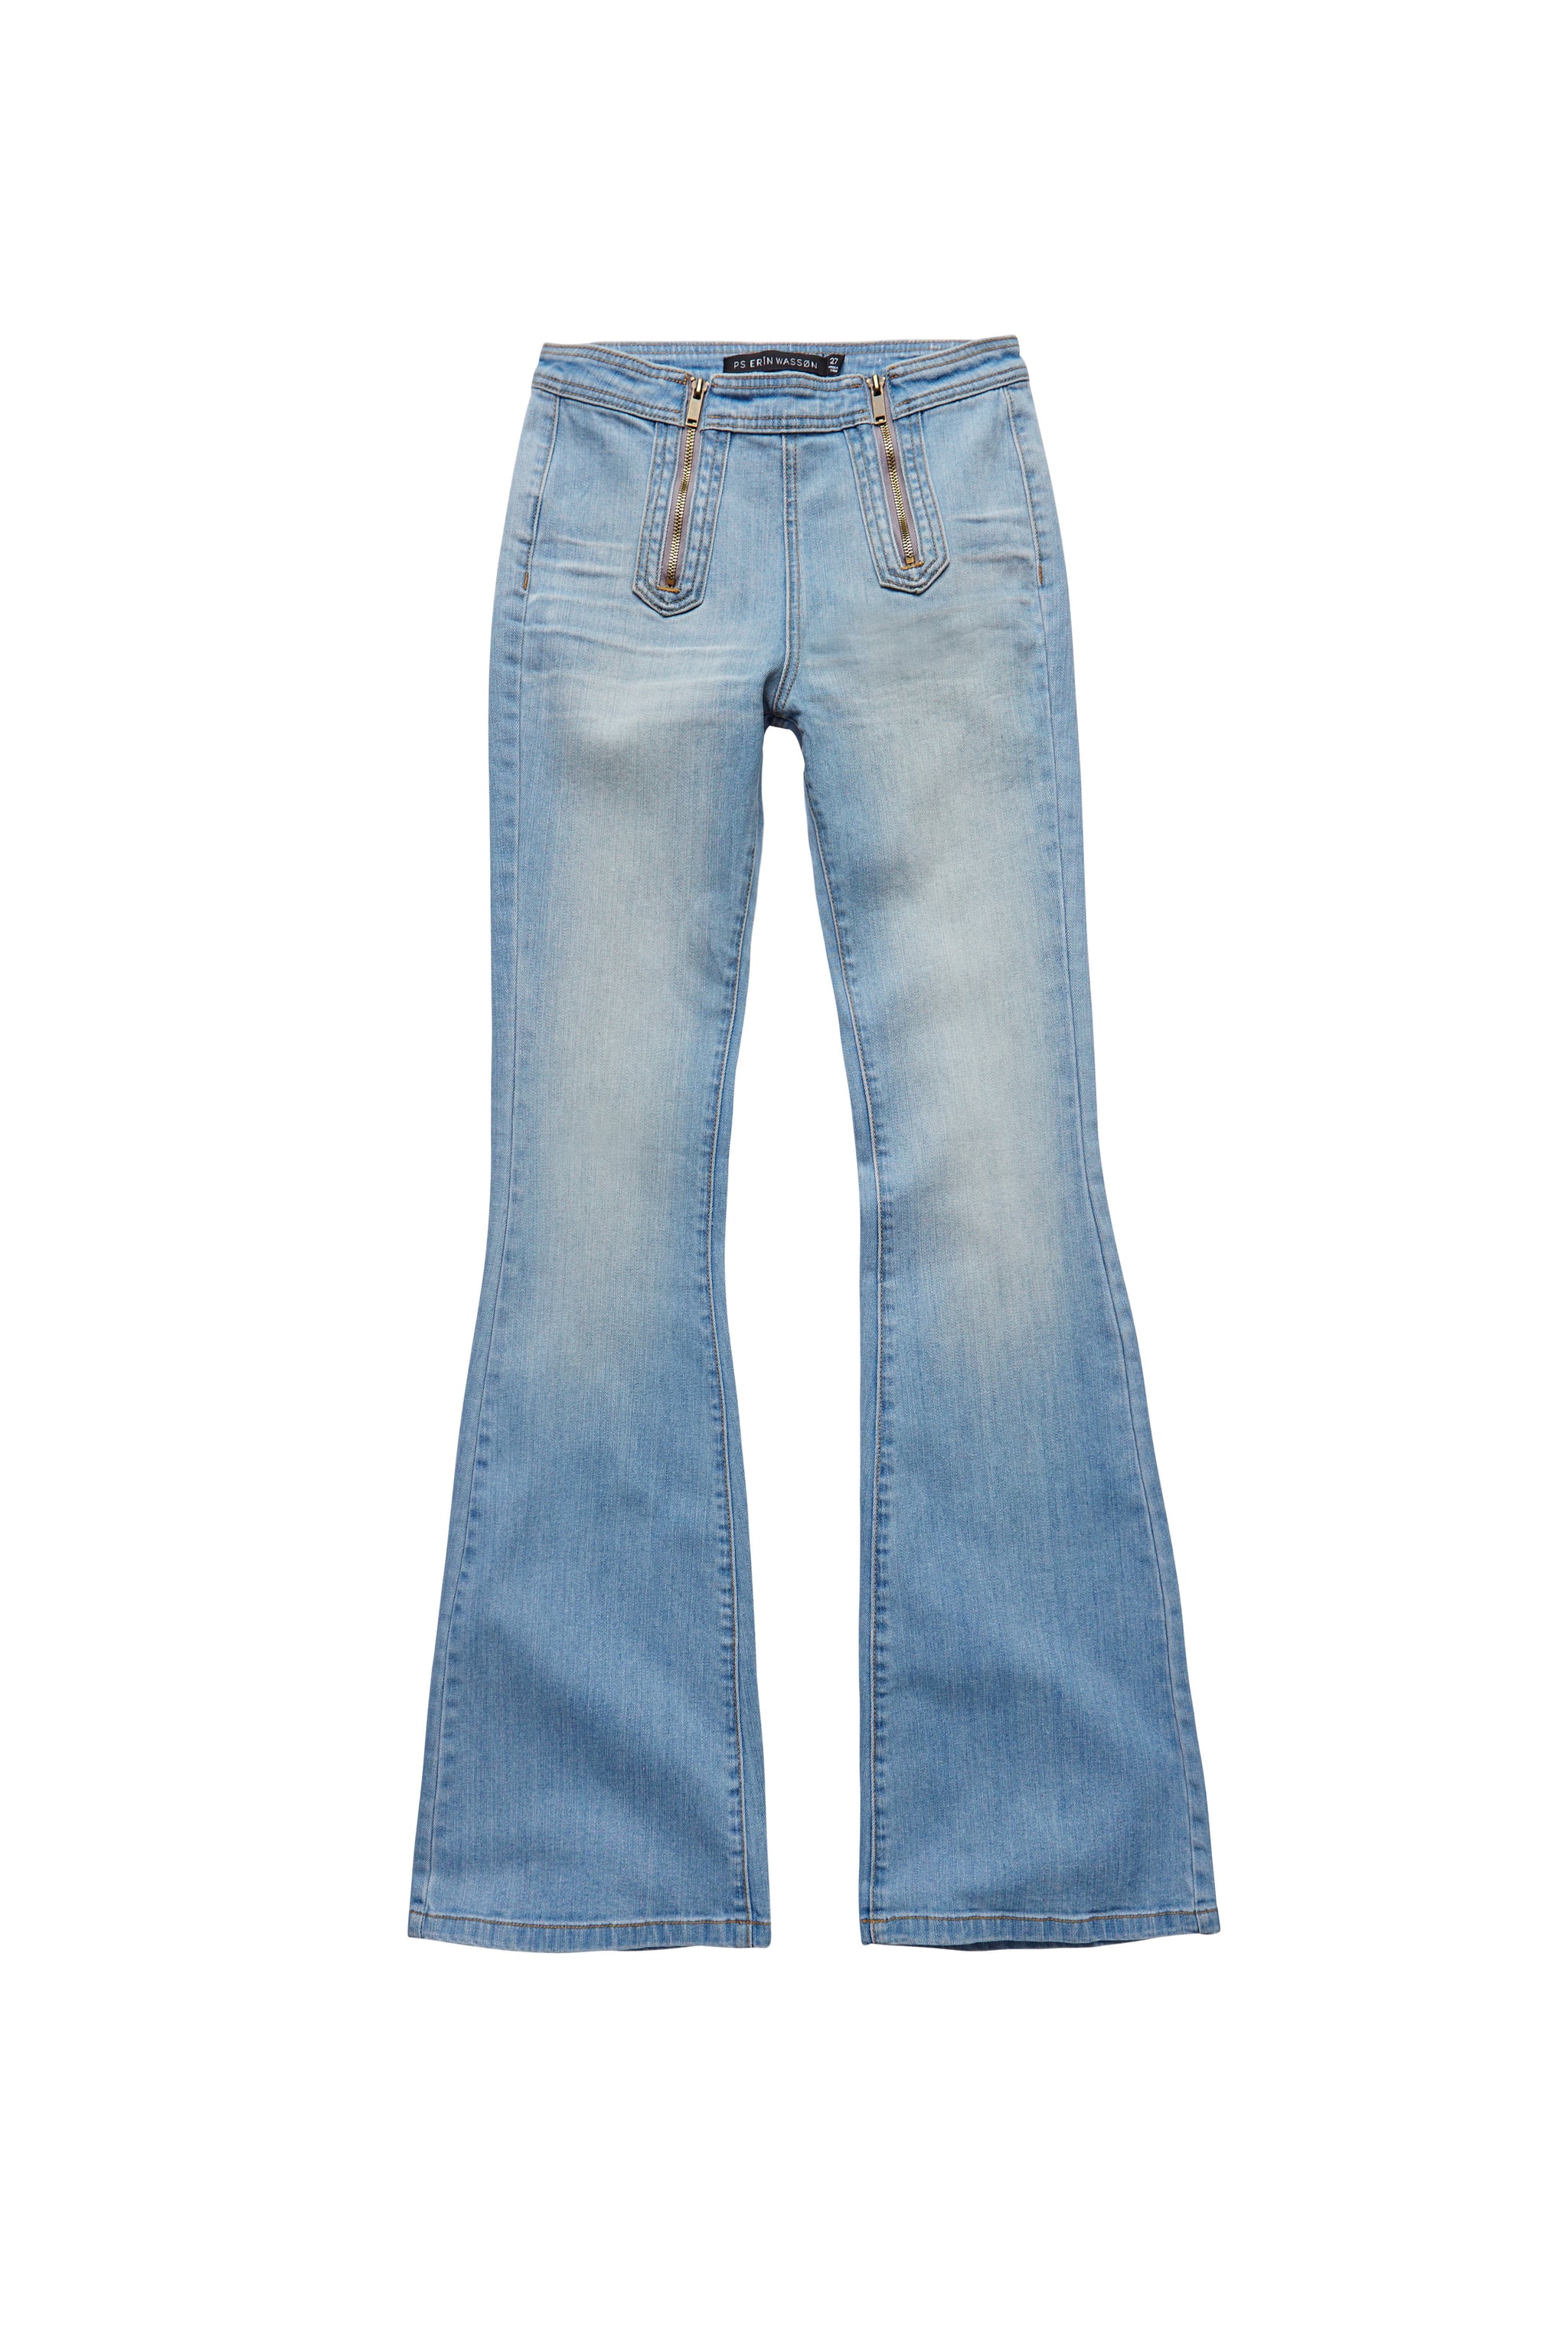 Erin Wasson Zip Front Super Flare Jeans ($55) | Erin Wasson's PacSun Collab  Will Help You Nail Laid-Back Summer Style | POPSUGAR Fashion Photo 5